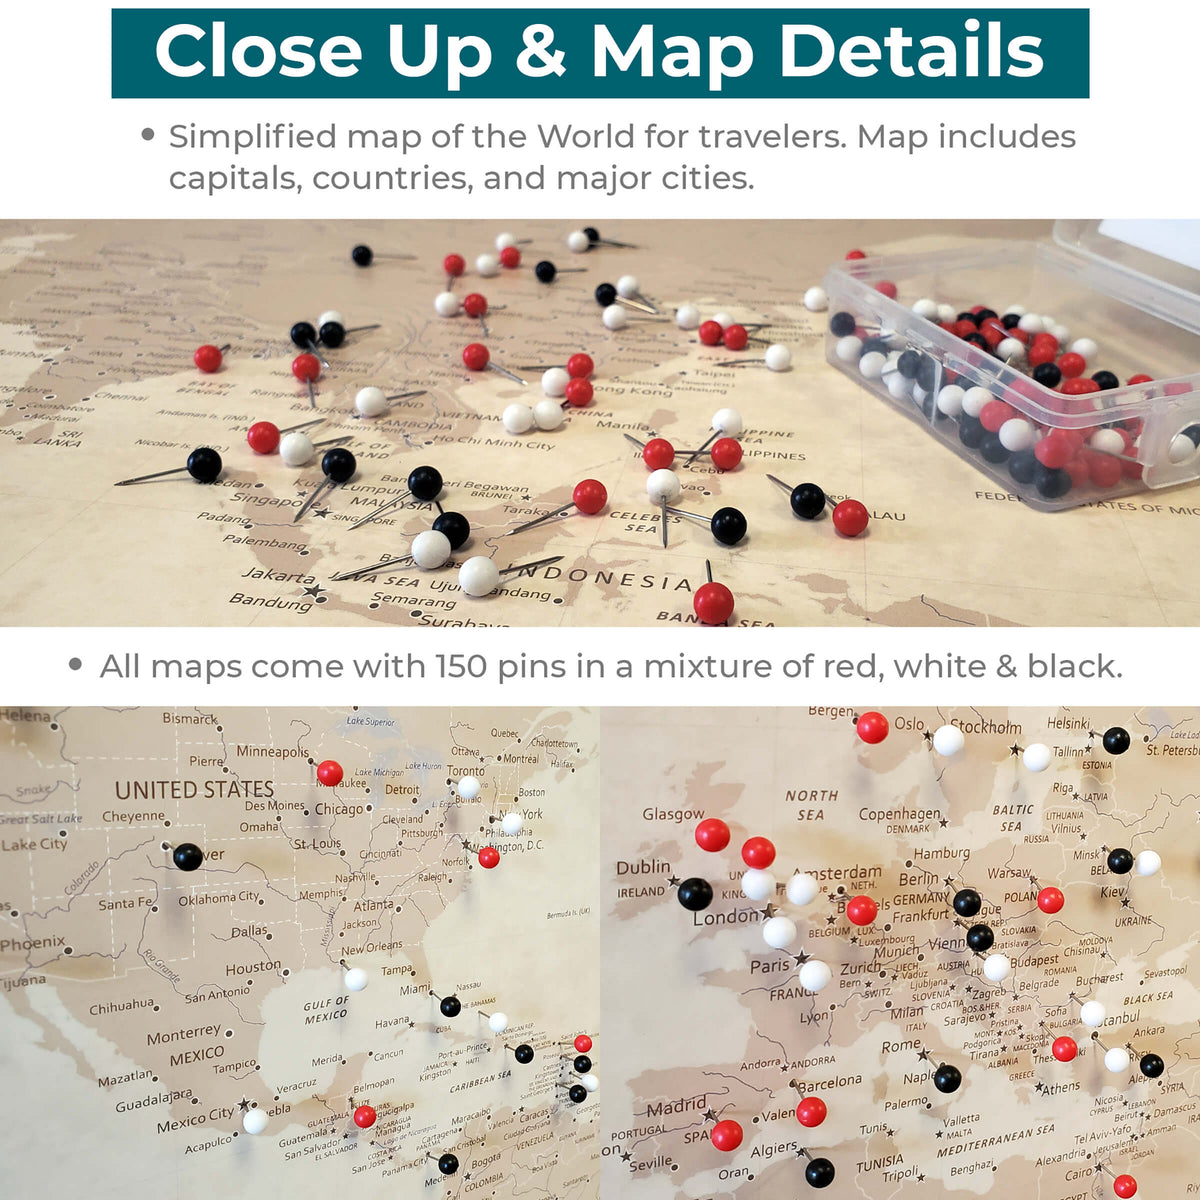 Vintage World Push Pin Travel Maps - Close up and Details